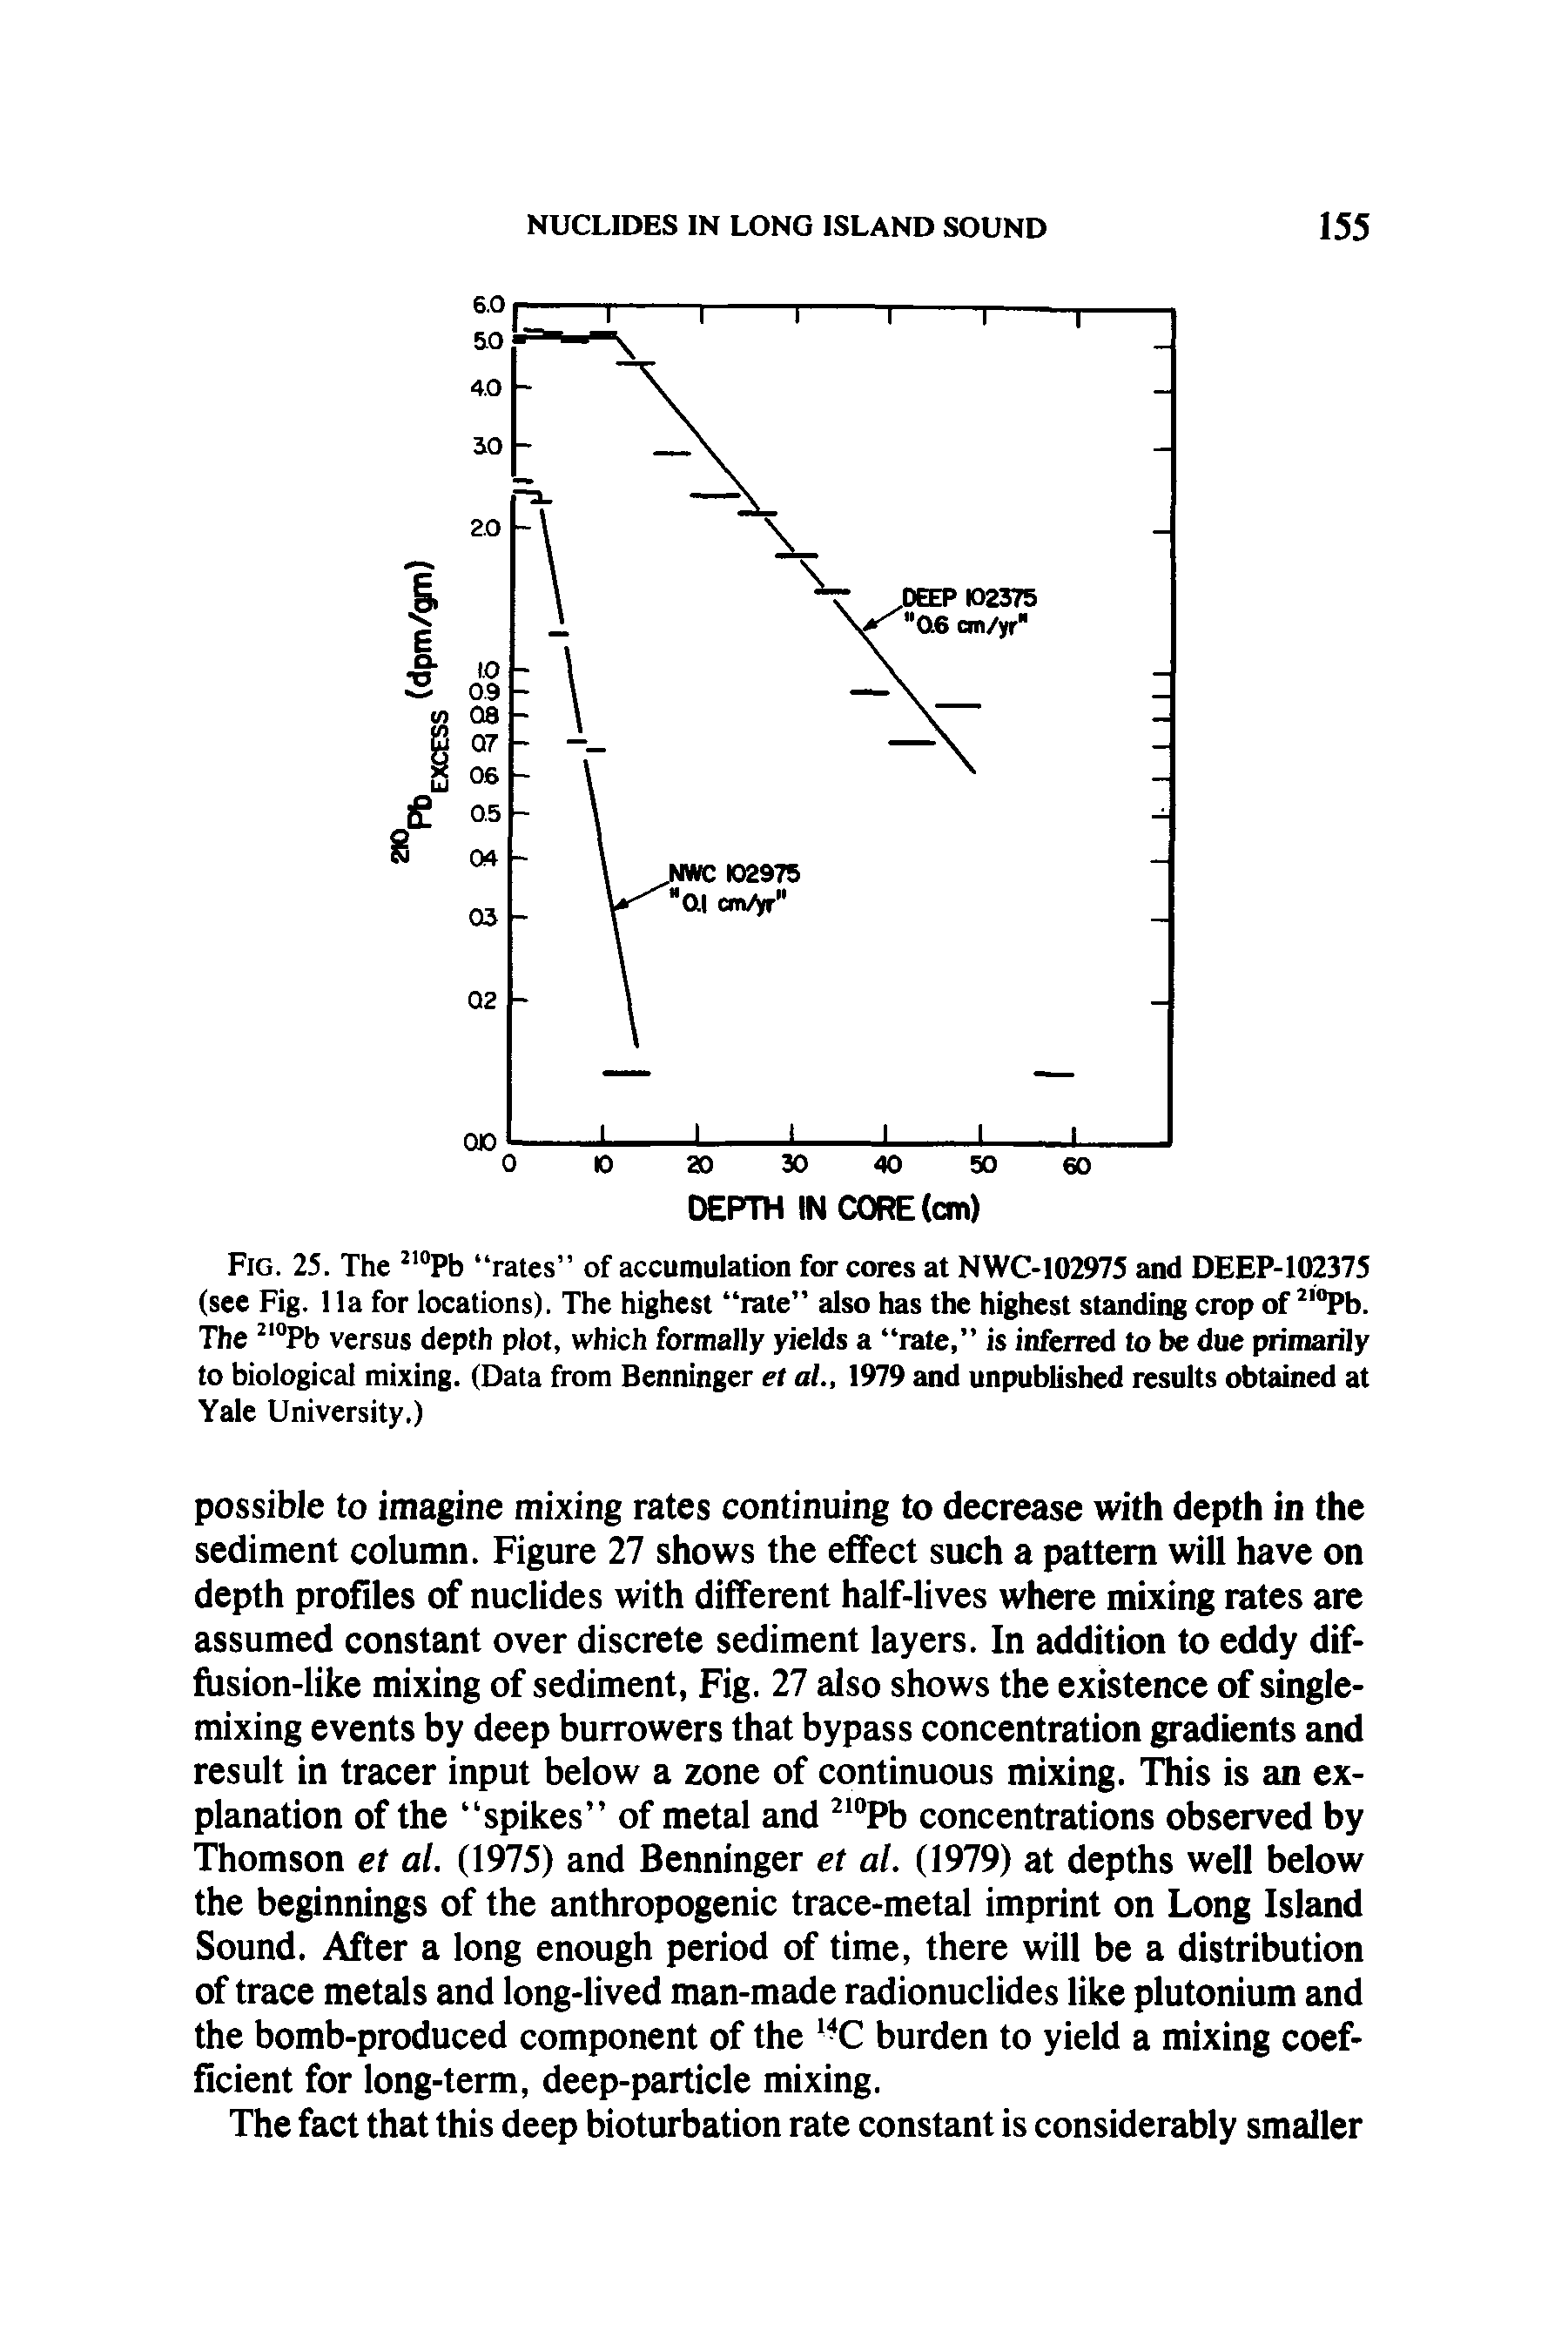 Fig. 25. The Pb rates of accumulation for cores at NWC-102975 and DEEP-102375 (see Fig. 1 la for locations). The highest rate also has the highest standing crop of Pb. The Pb versus depth plot, which formally yields a rate, is inferred to be due primarily to biological mixing. (Data from Benninger et al., 1979 and unpublished results obtained at Yale University.)...